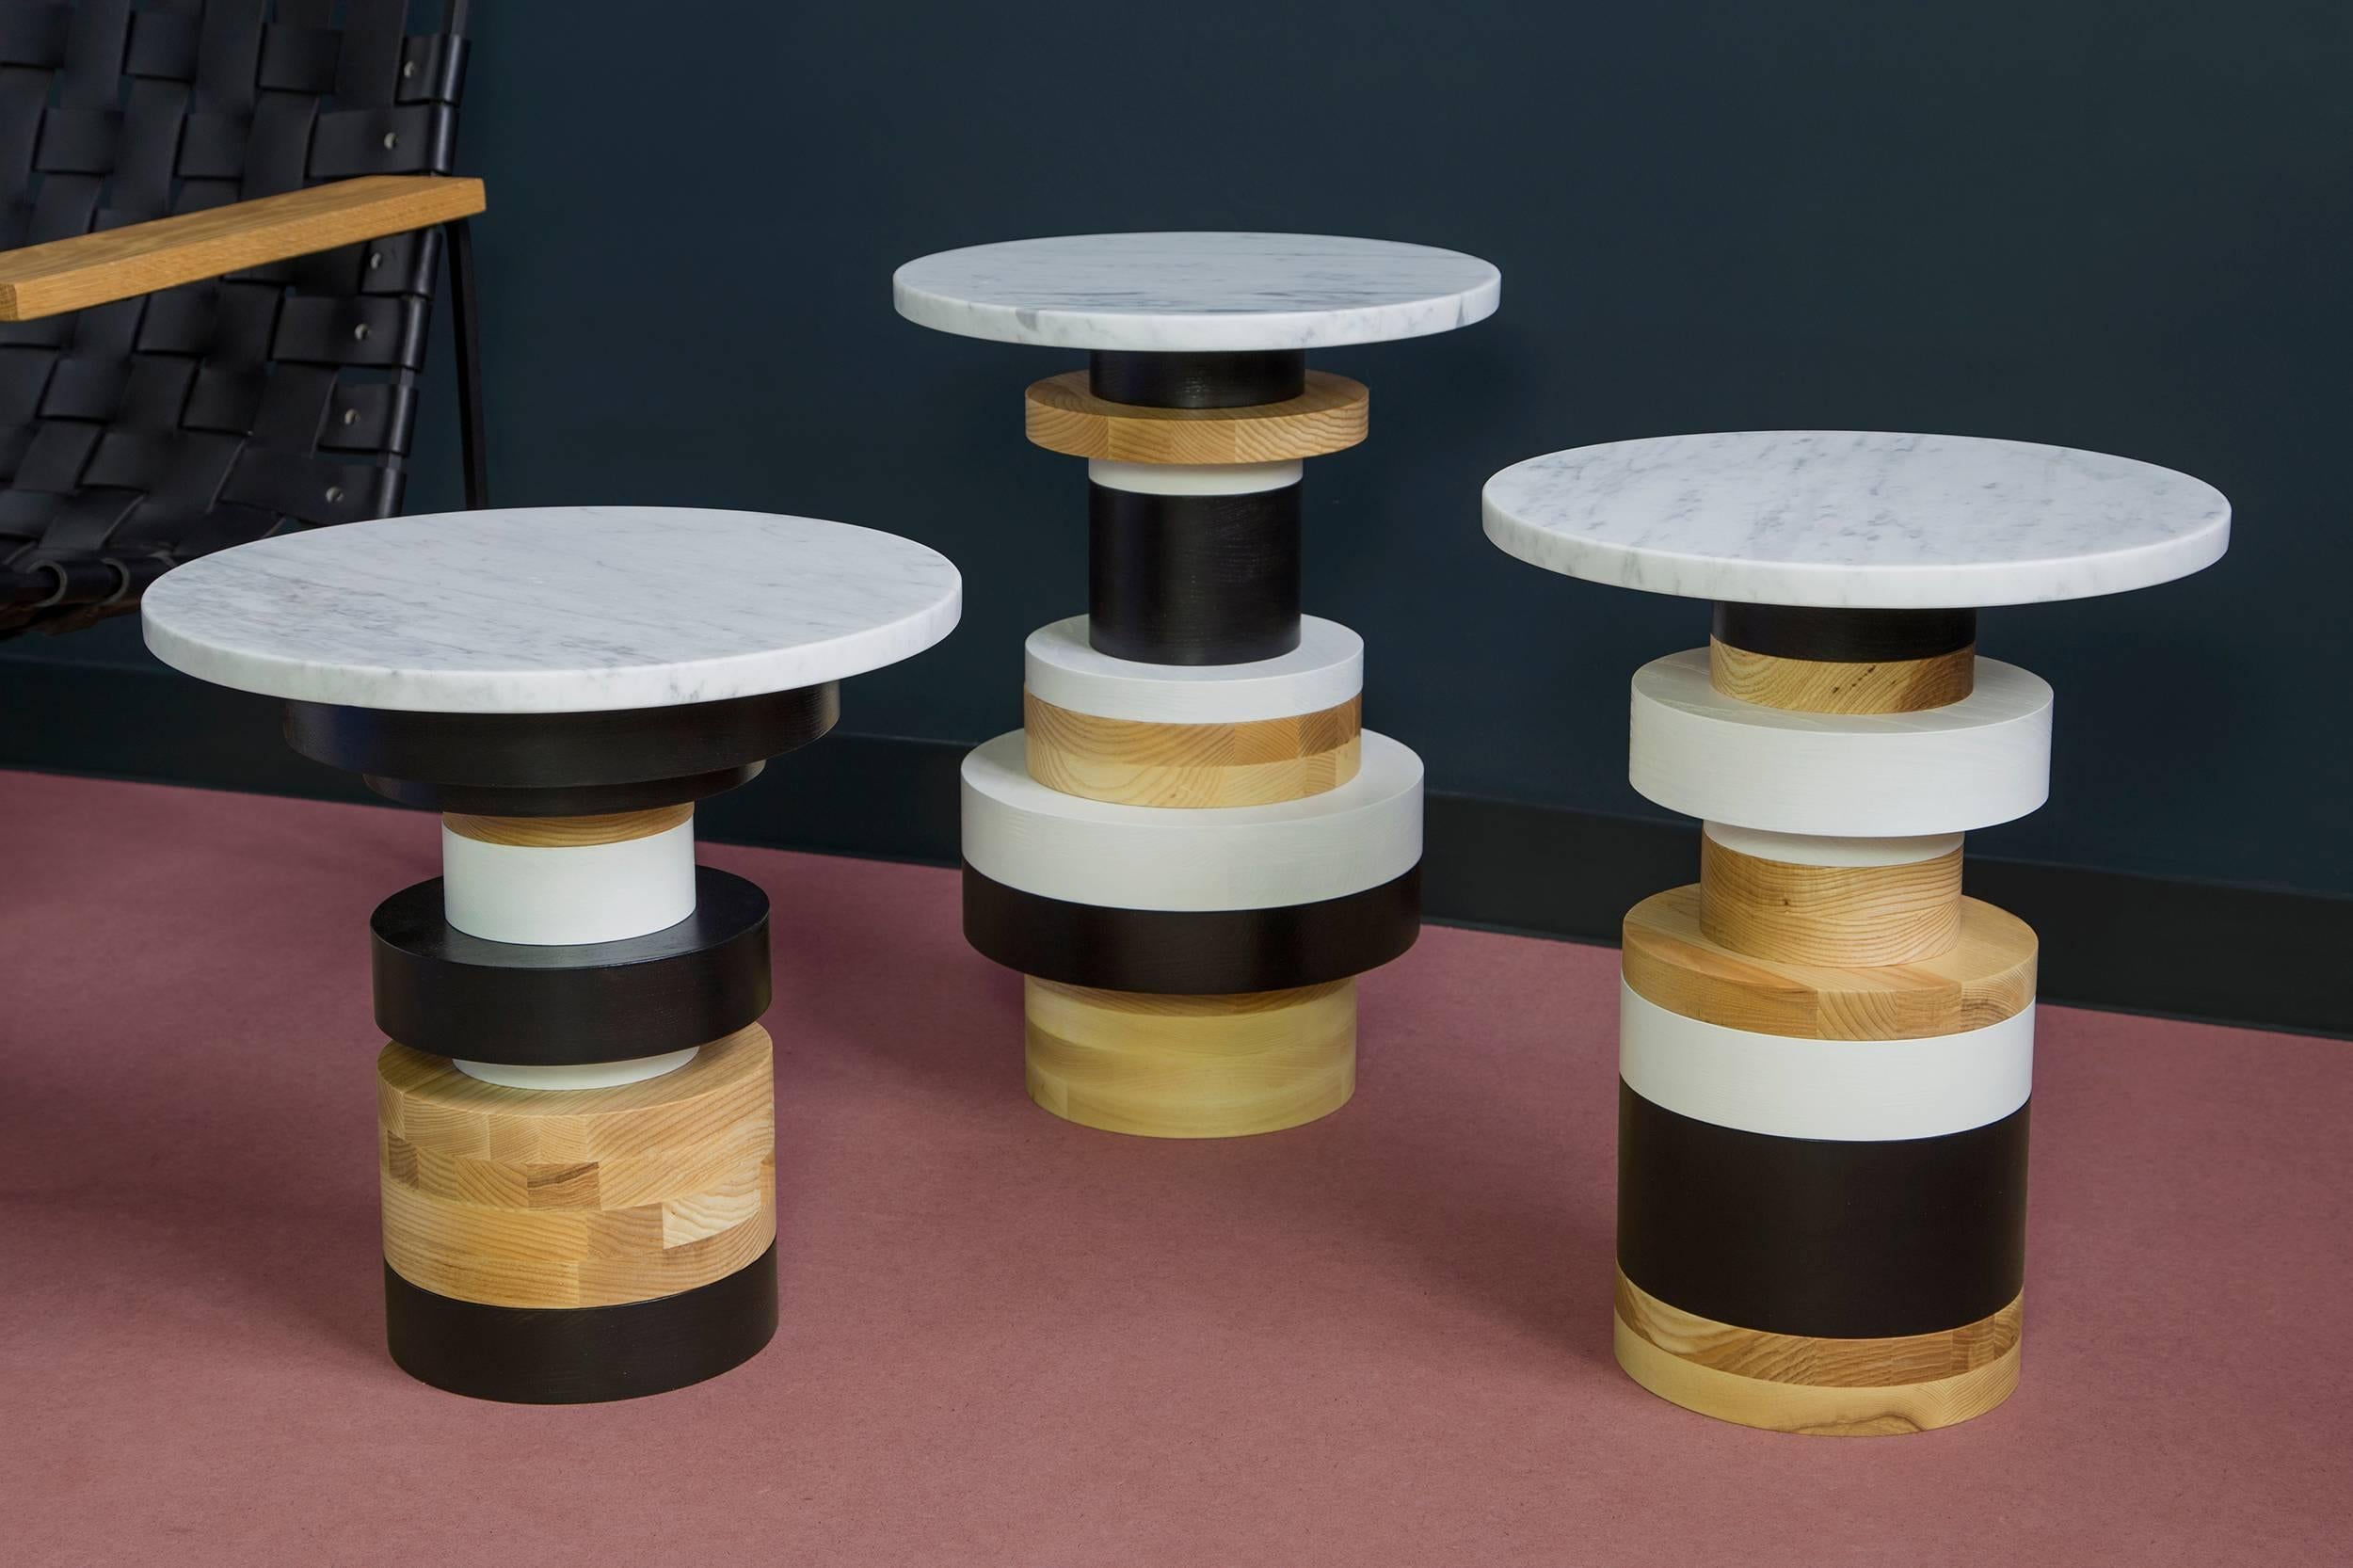 The Sottsass-inspired “Sass Tables” are simple, sculptural accents for any interior space. Made from stacked wooden bases and a honed marble top, Sass Tables are perfect individually or clustered. Measure: tall 16 inch, 18 inch diameter